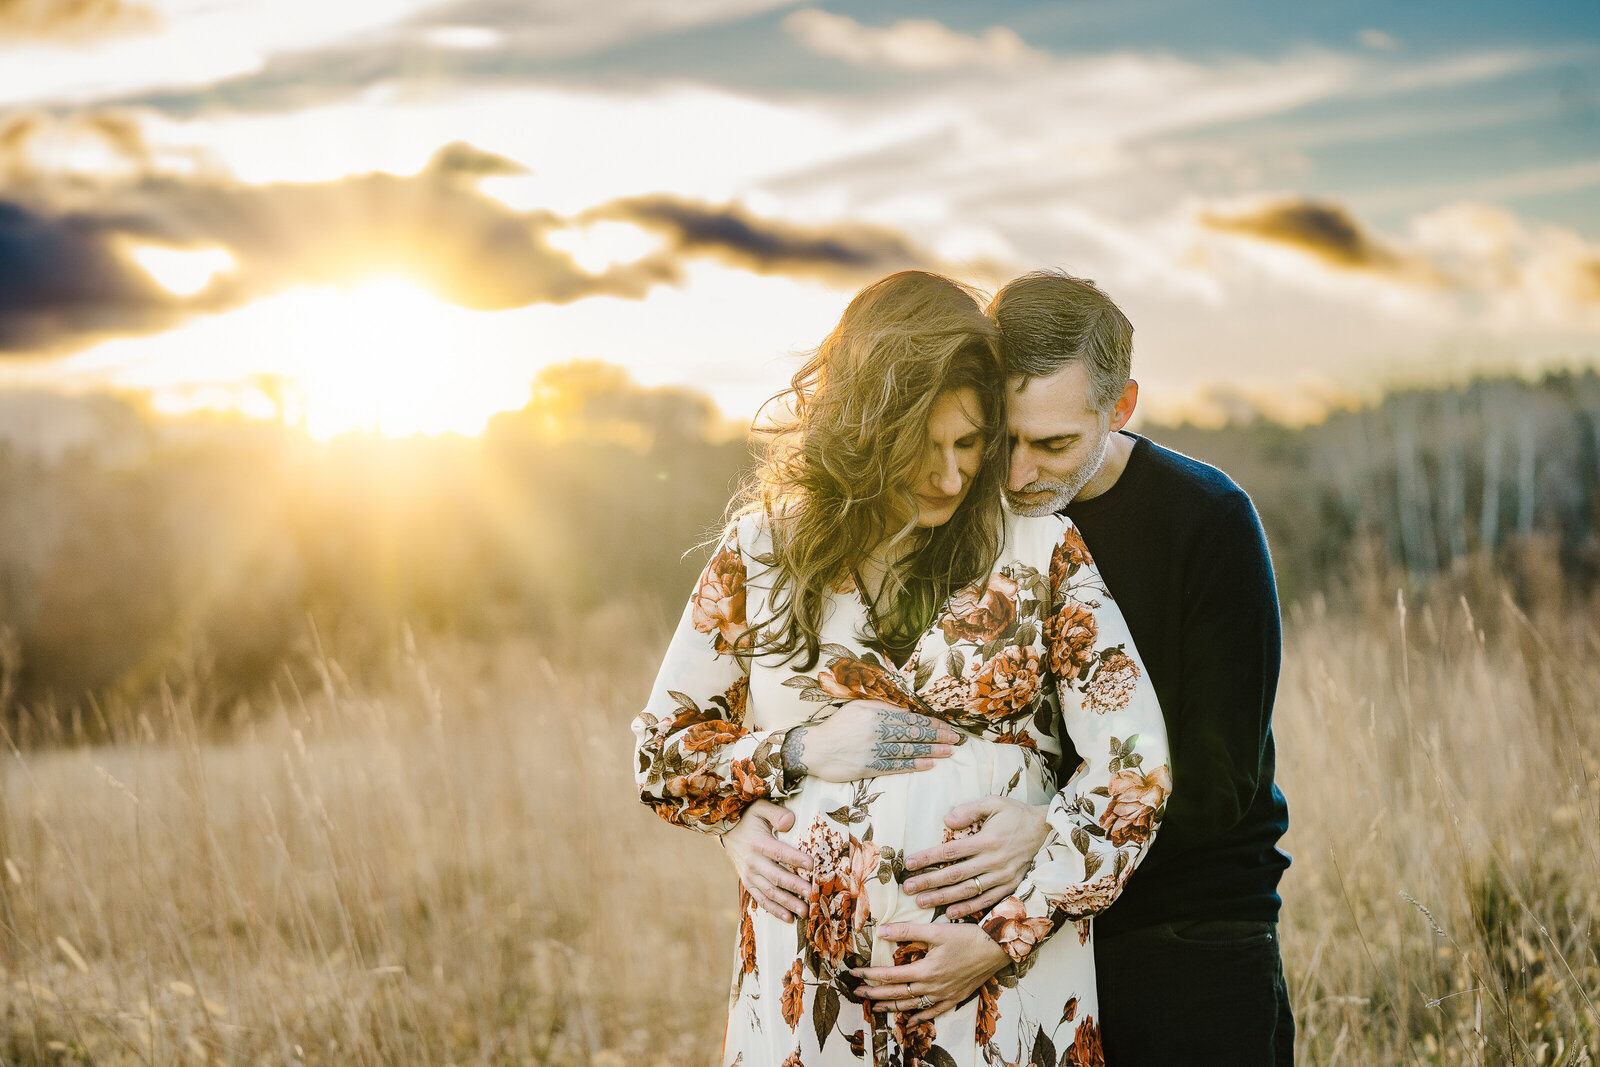 sun bursts through clouds during maternity photoshoot in field